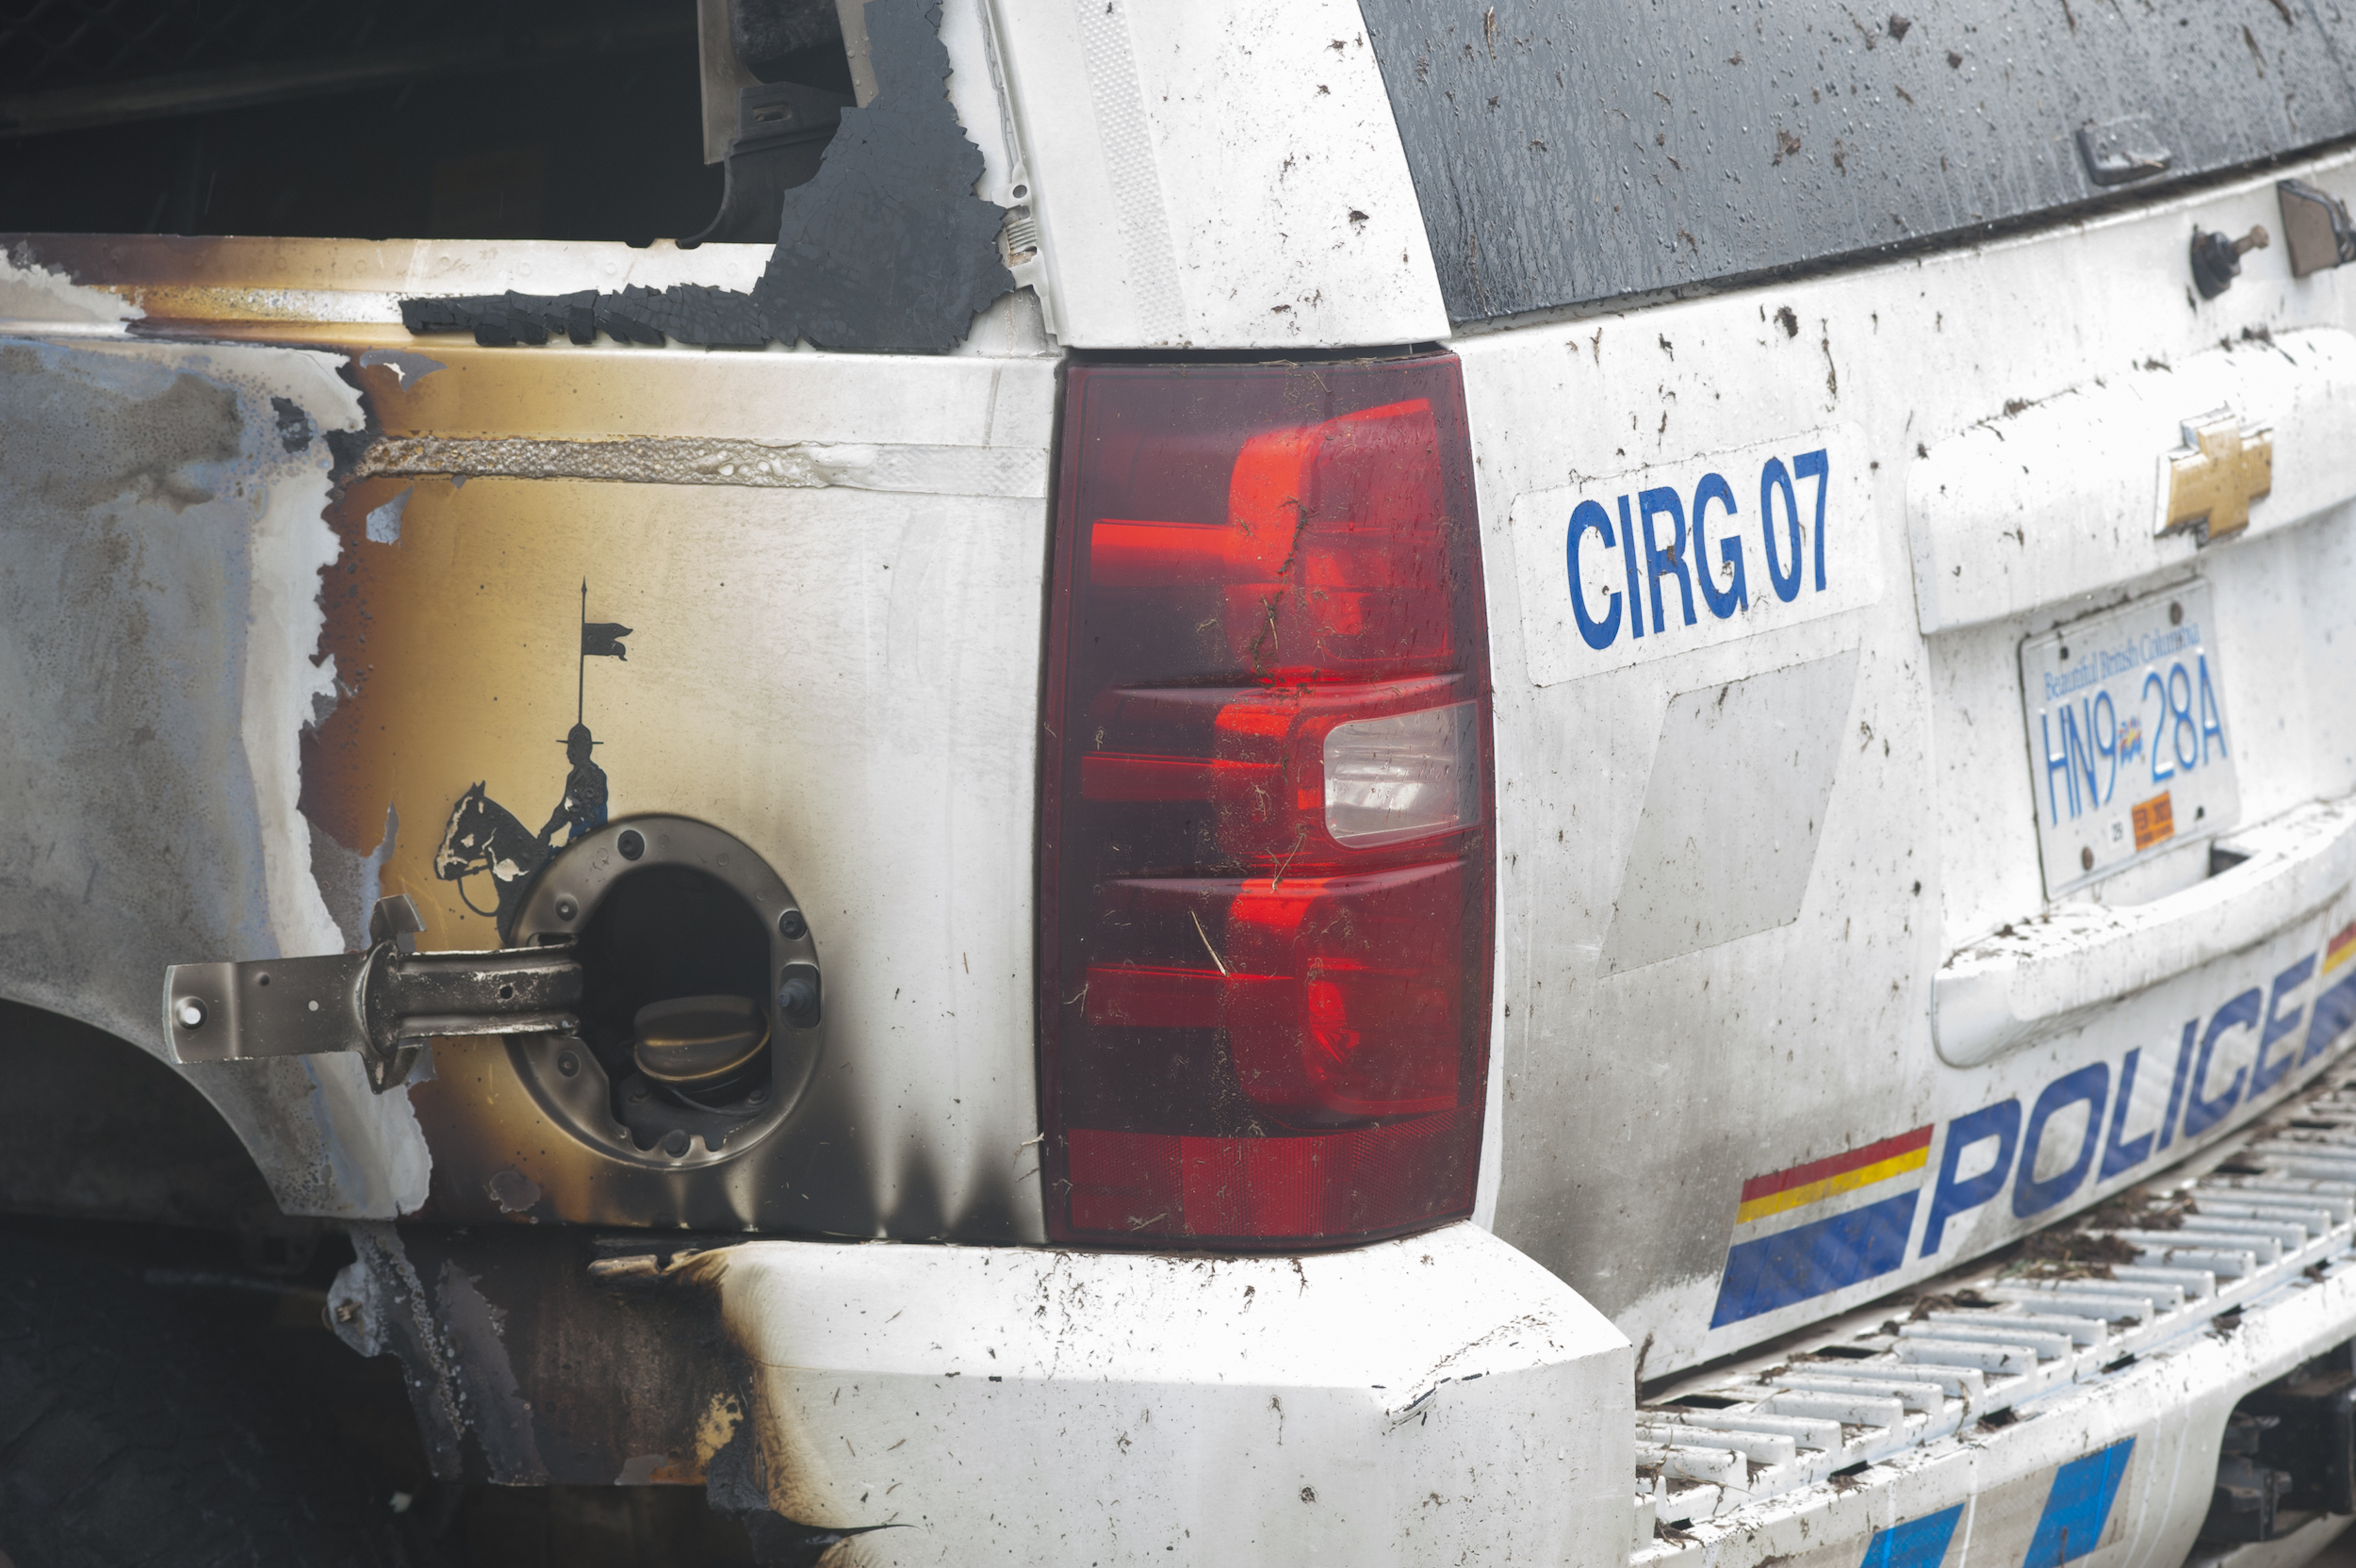 A burned RCMP vehicle with the sticker "CIRG 07" indicating it belongs to the controversial Community-Industry Response Group, a special unit assigned to police opposition to industrial projects